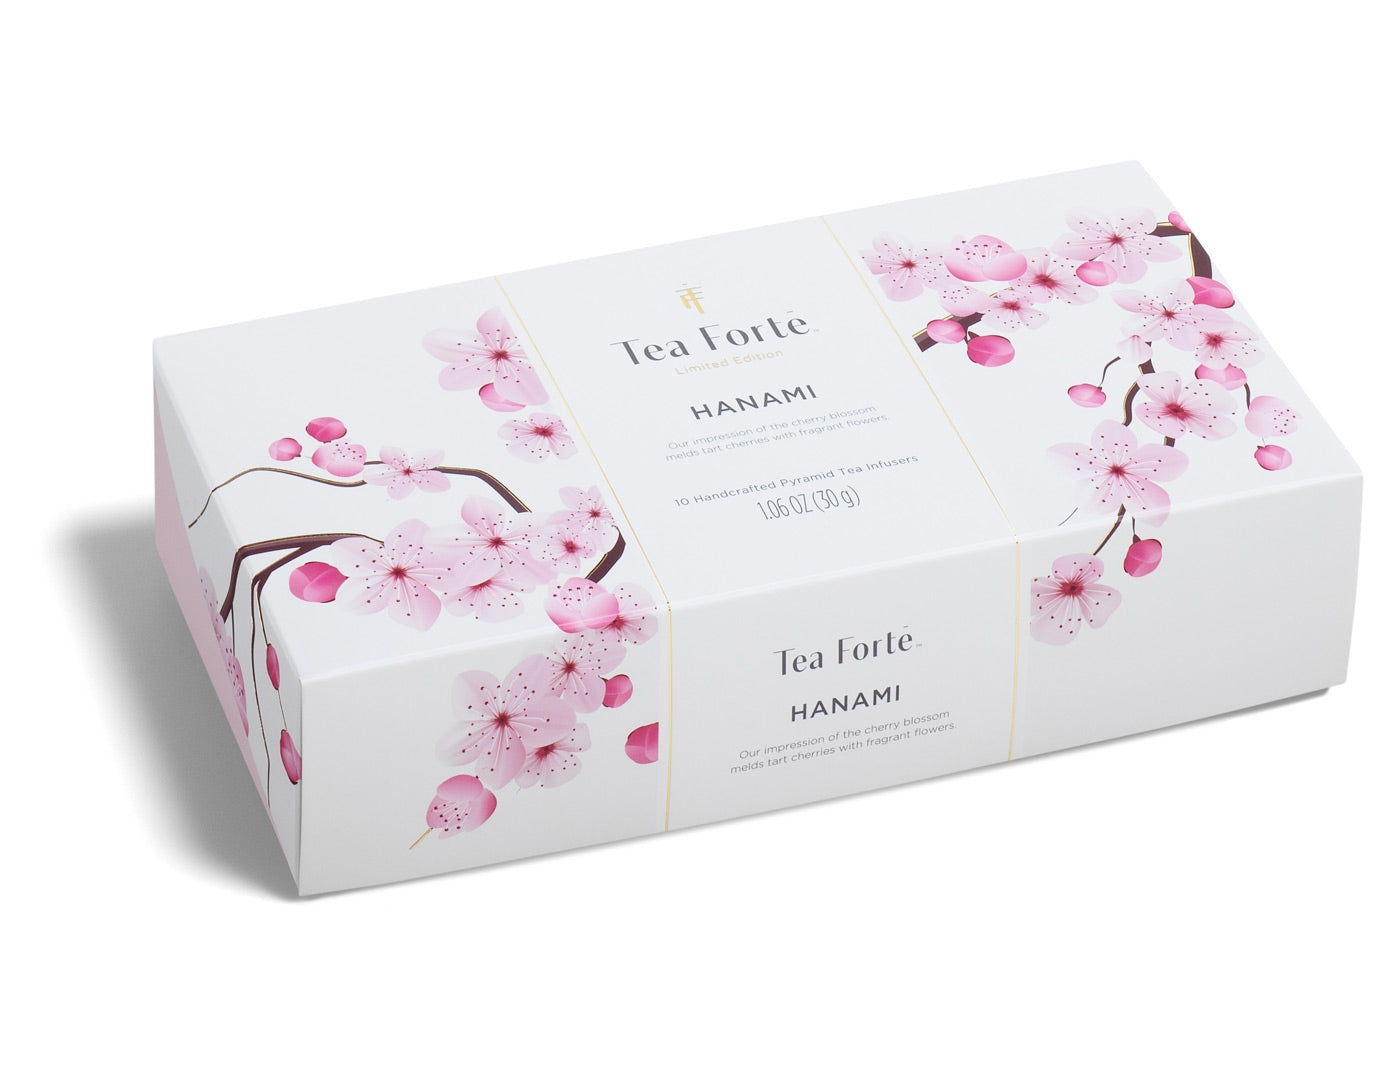 Hanami Collection in a 10 count petite presentation box with lid closed